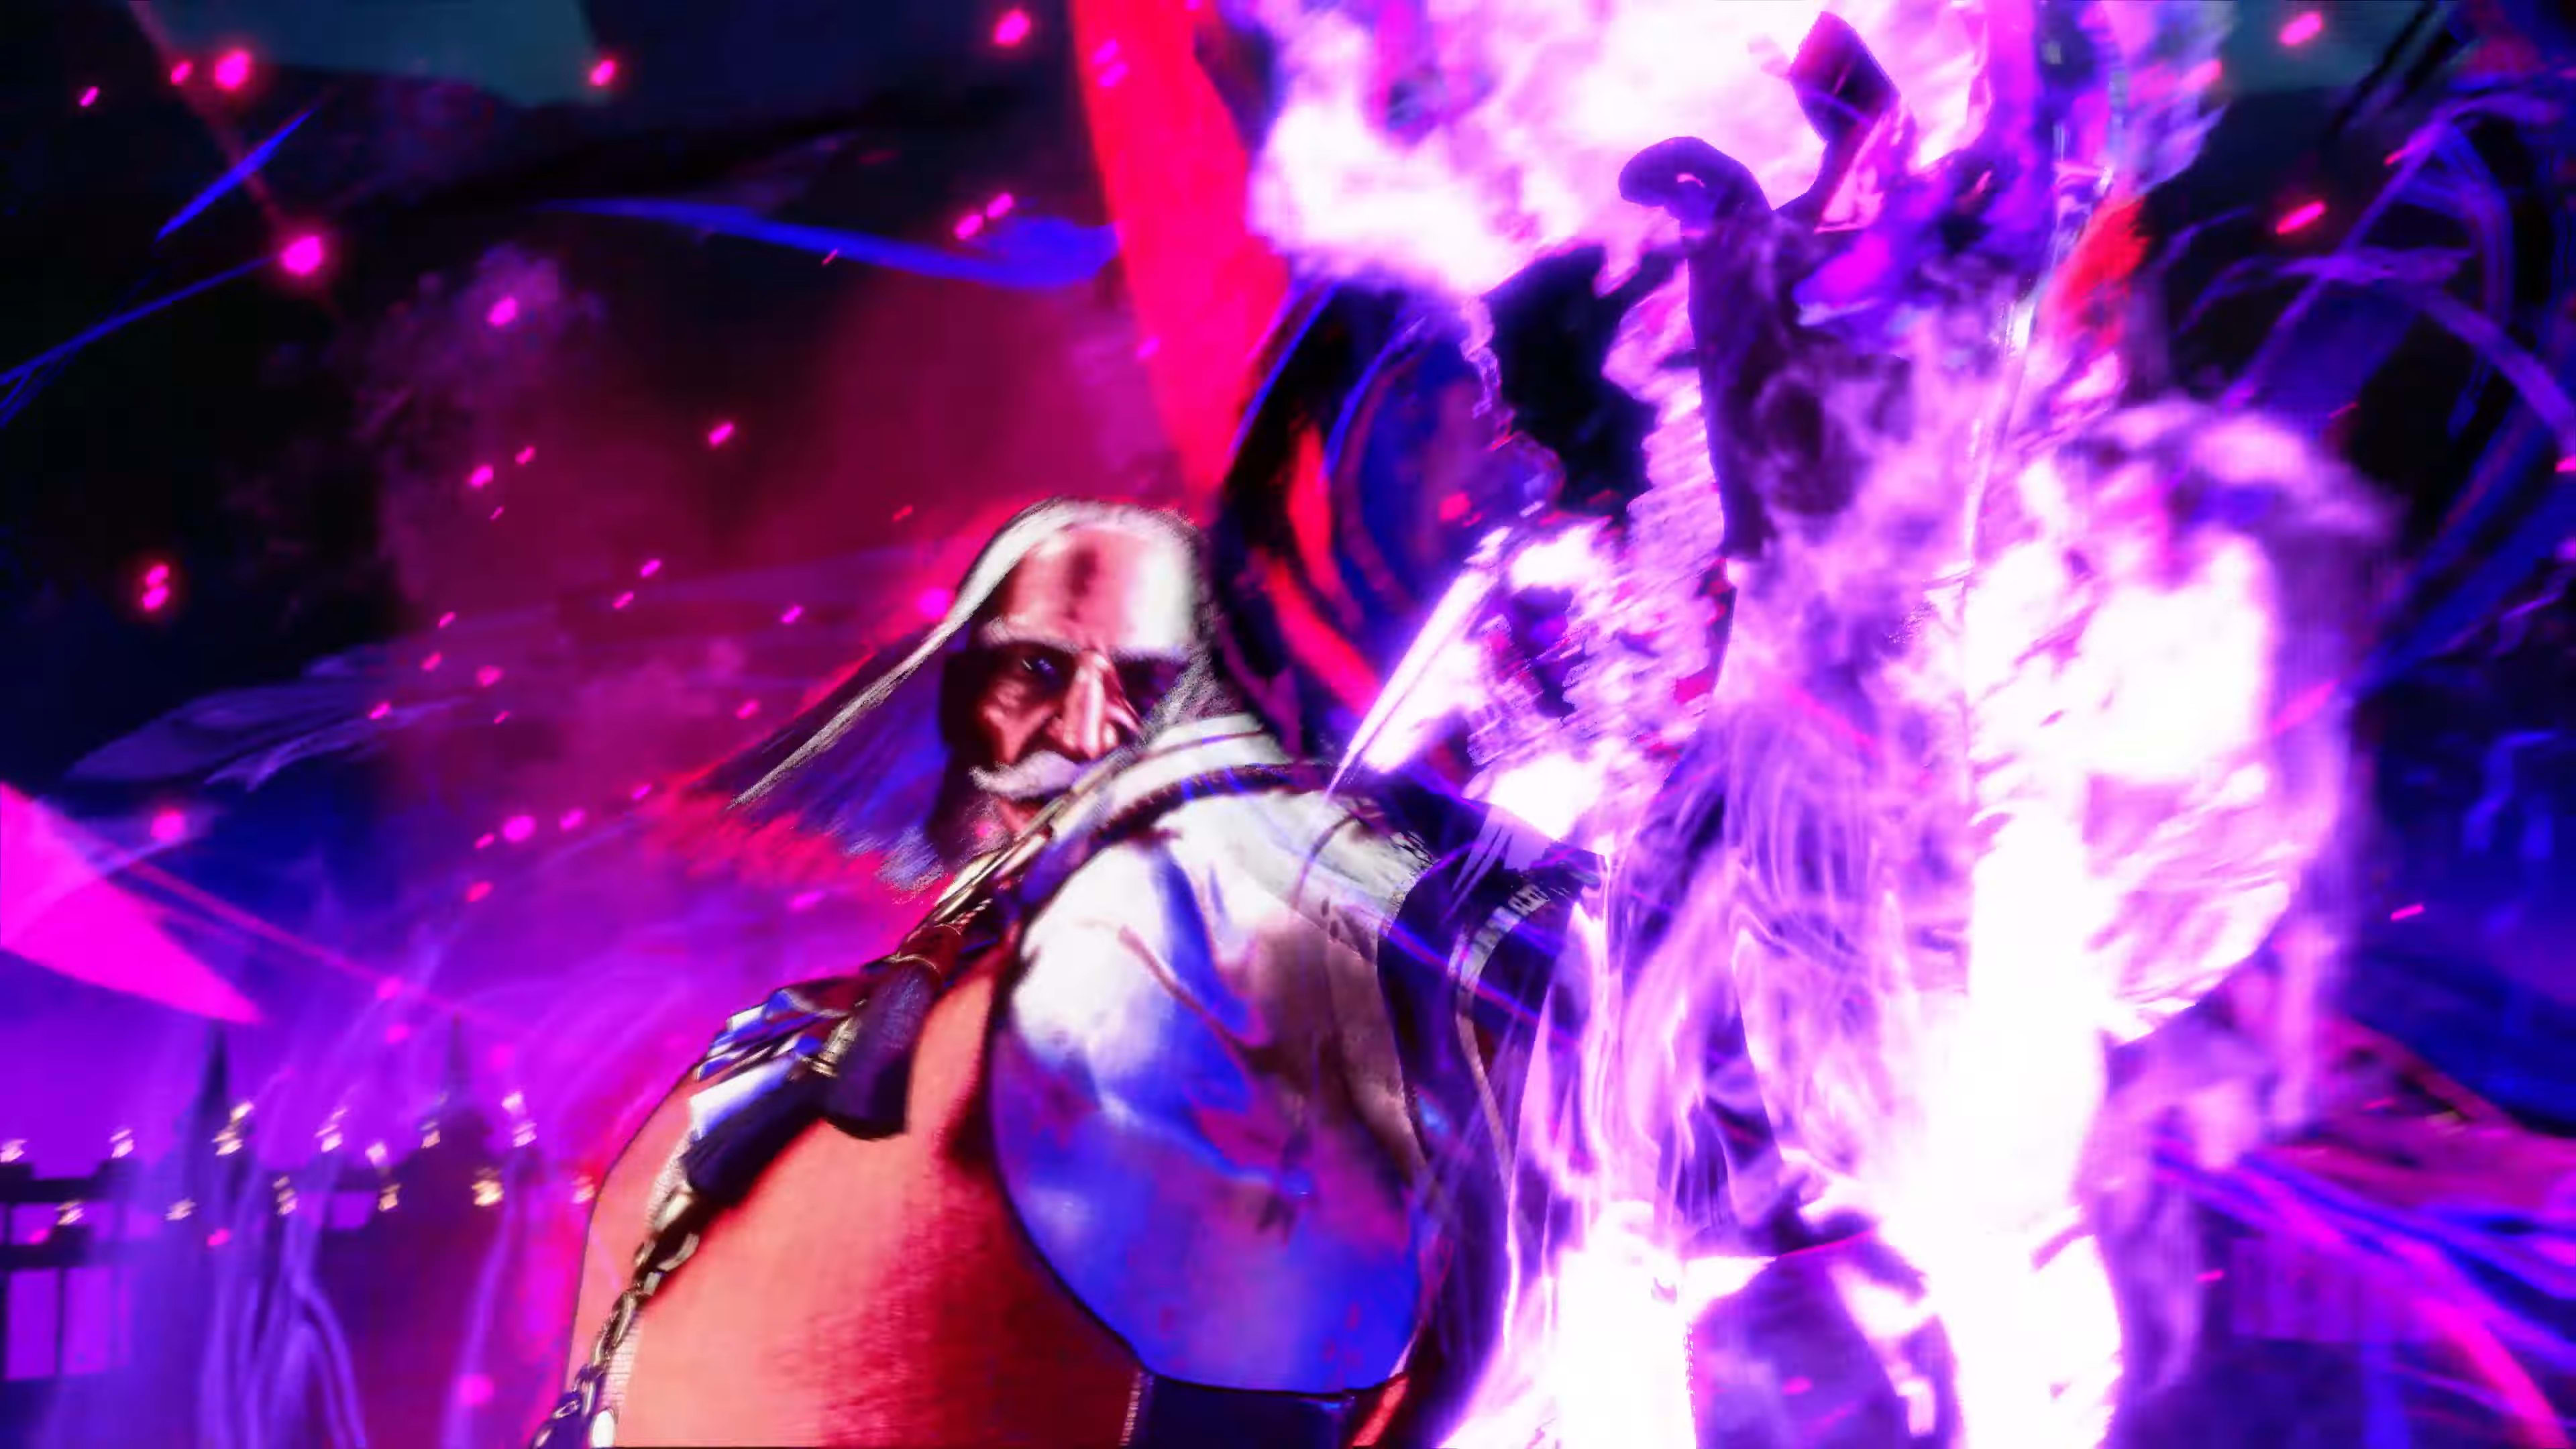 5 Best Characters for Beginners in Street Fighter 6